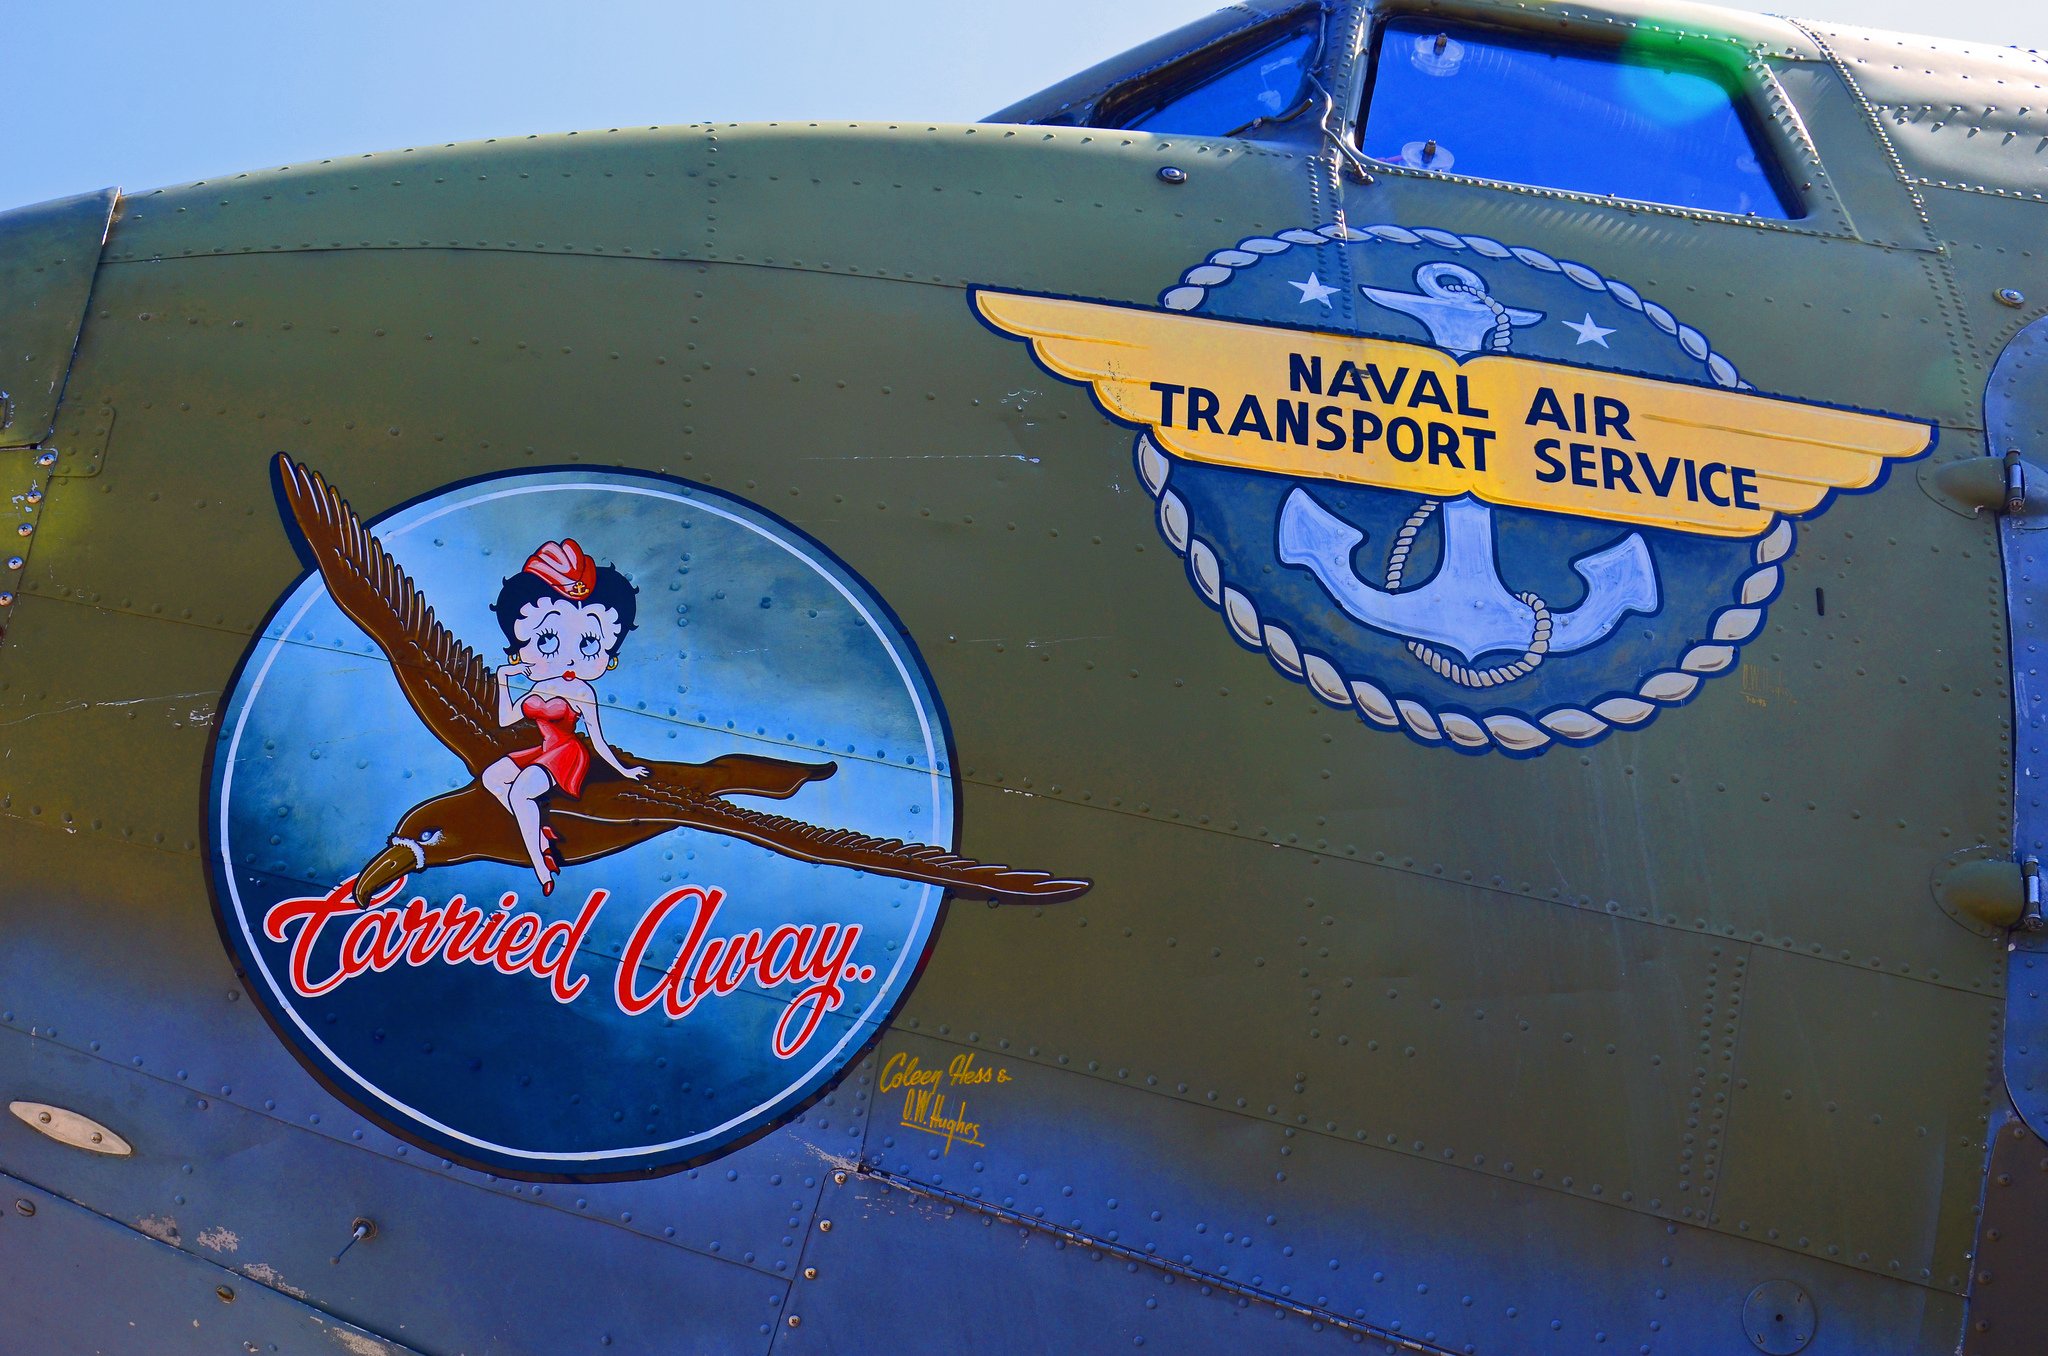 Nose Art Aircrafts Plane Fighter Pin Up